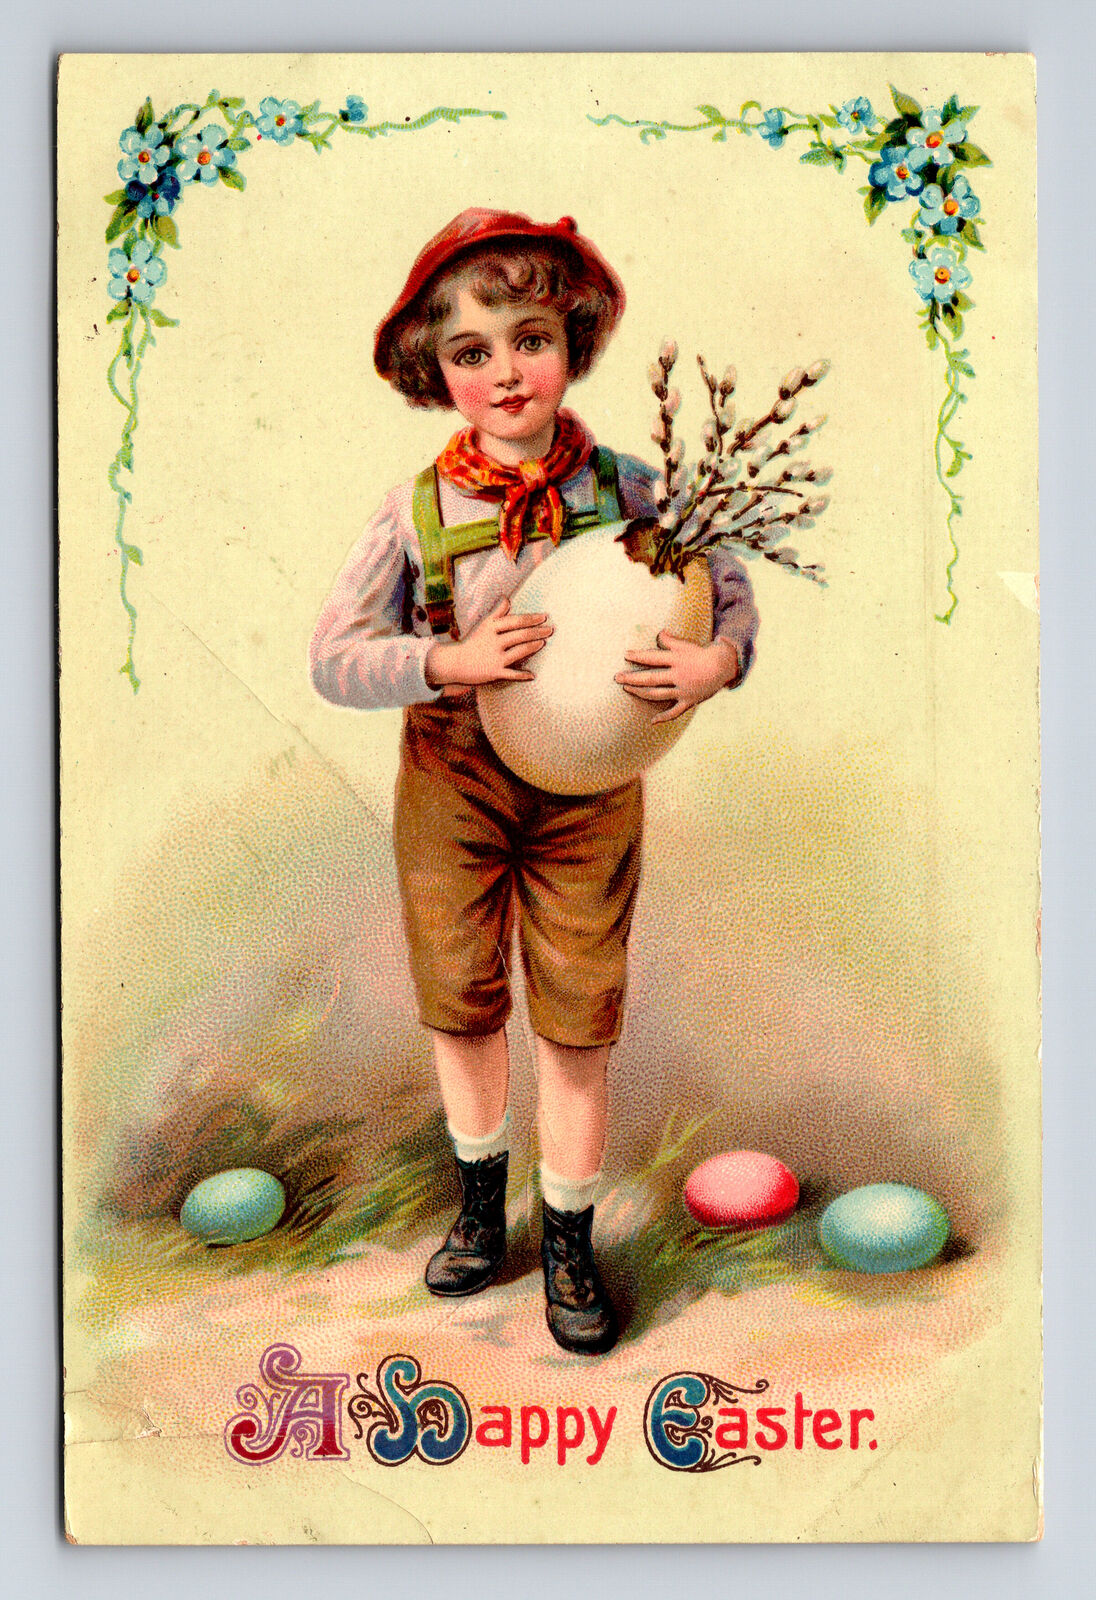 Happy Easter Boy Giant Egg Willows Forget Me Not Flowers Postcard